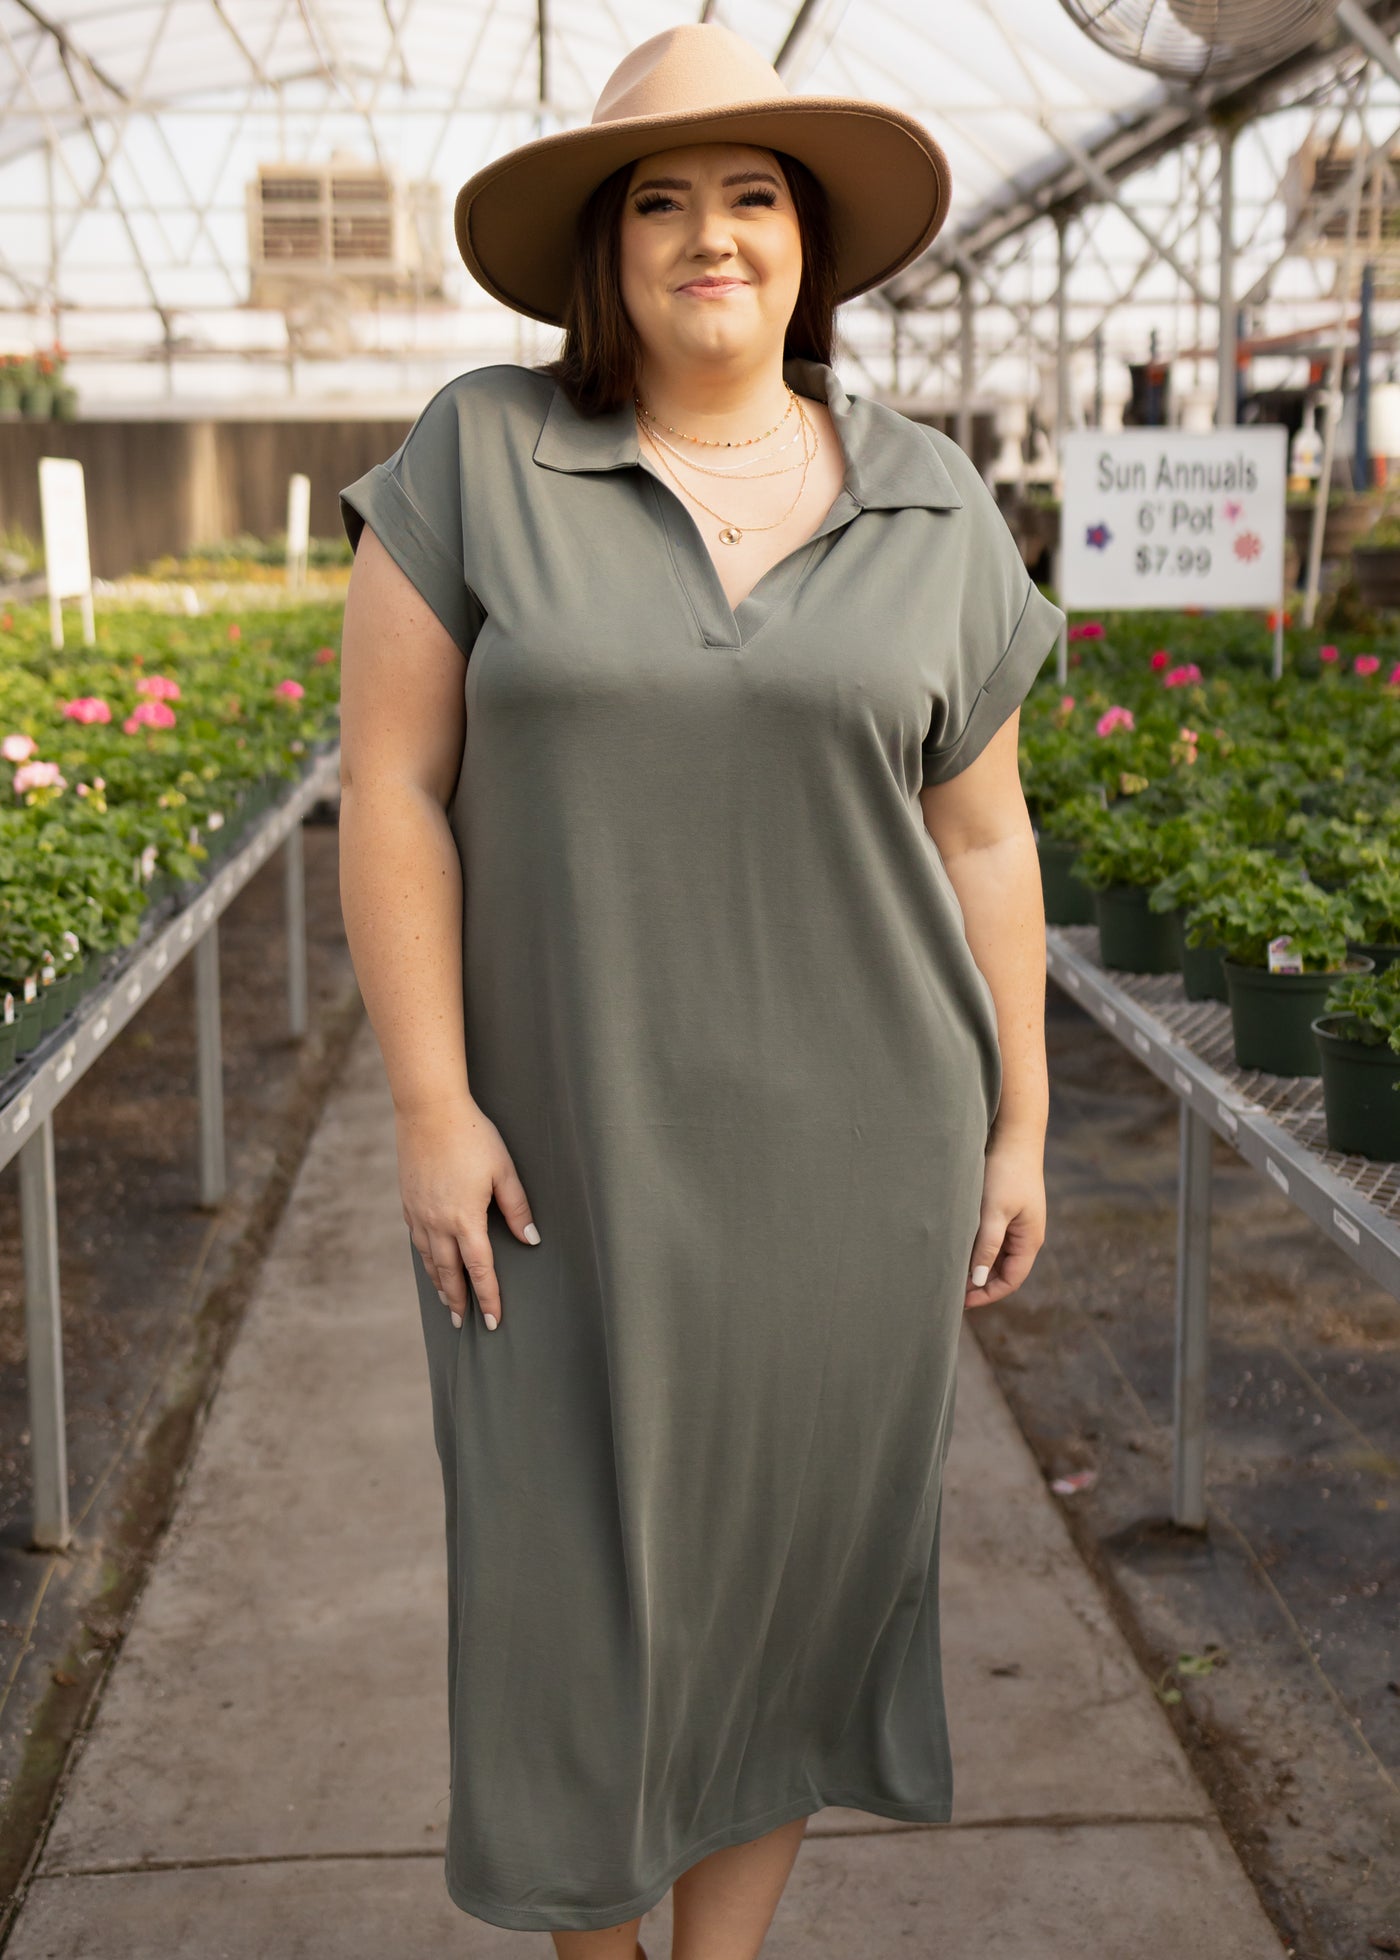 Short sleeve plus size olive dress with a collar